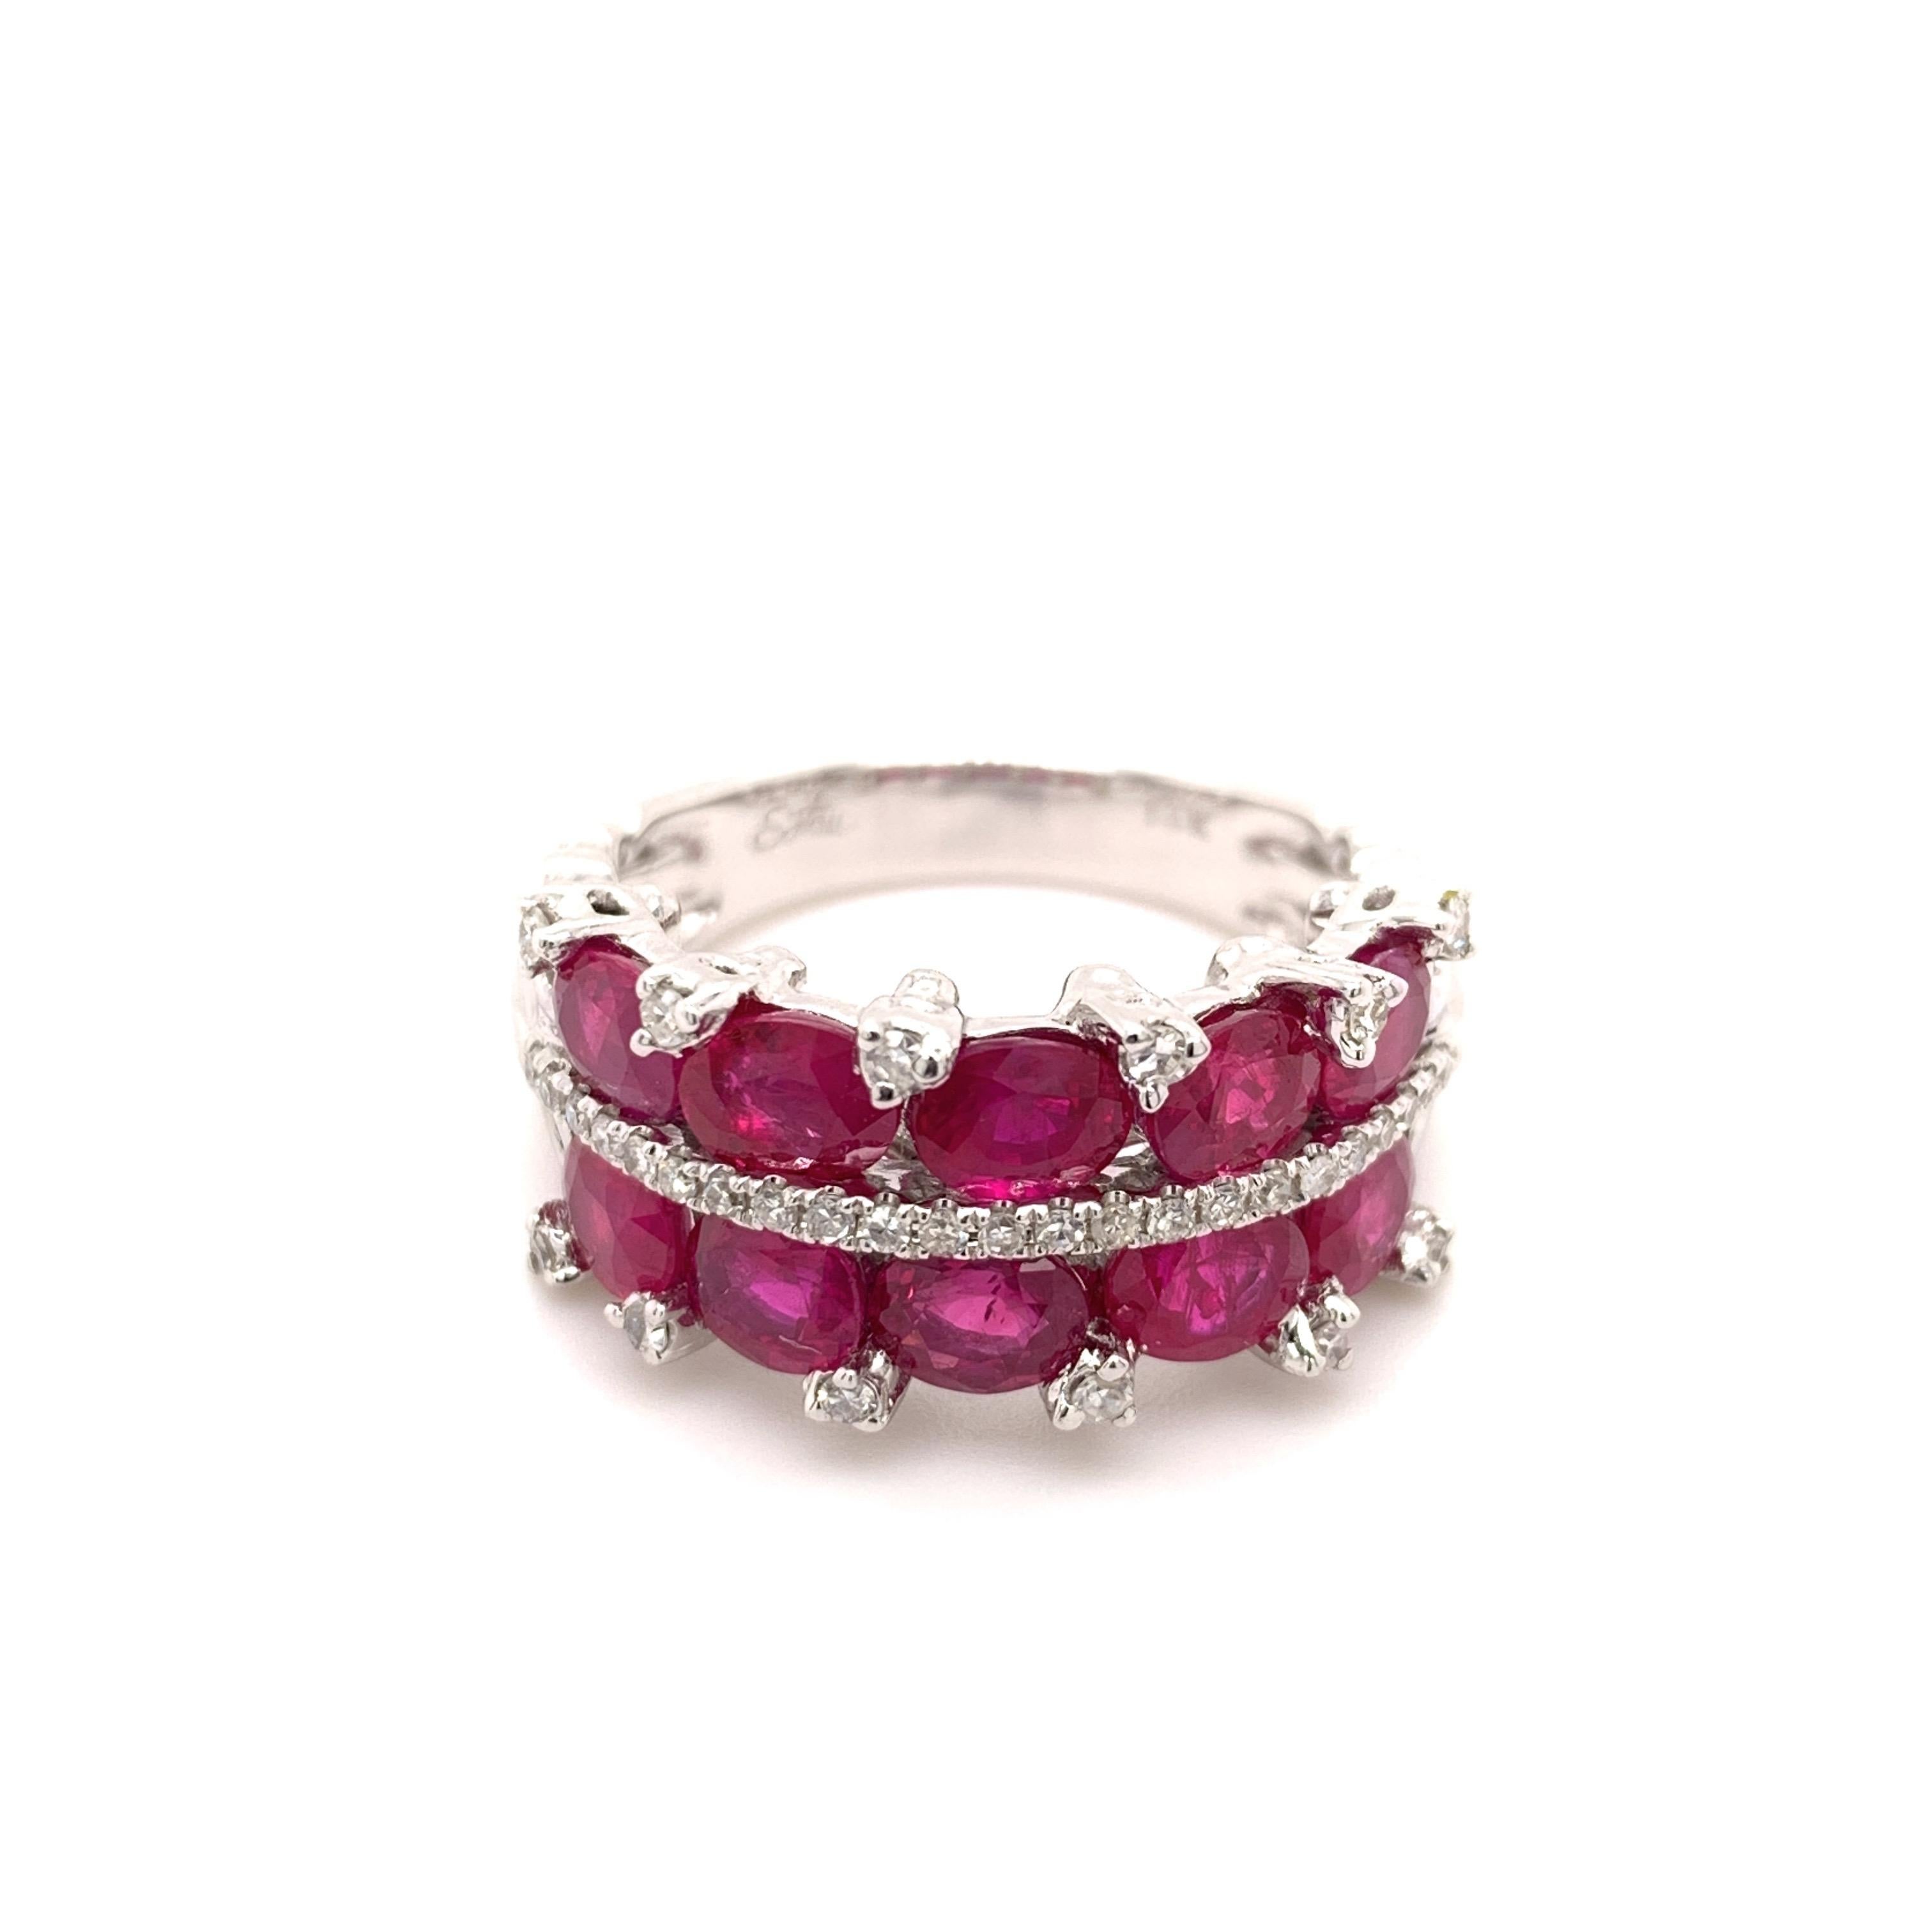 Beautiful ruby diamond ring. Pinkish red, oval faceted rubies mounted in two rows, dividing with round brilliant cut diamond row. Beautiful handcrafted high polished design set in 14 karat white gold  tapered band. 

Ruby: 3.5 carats, oval faceted,